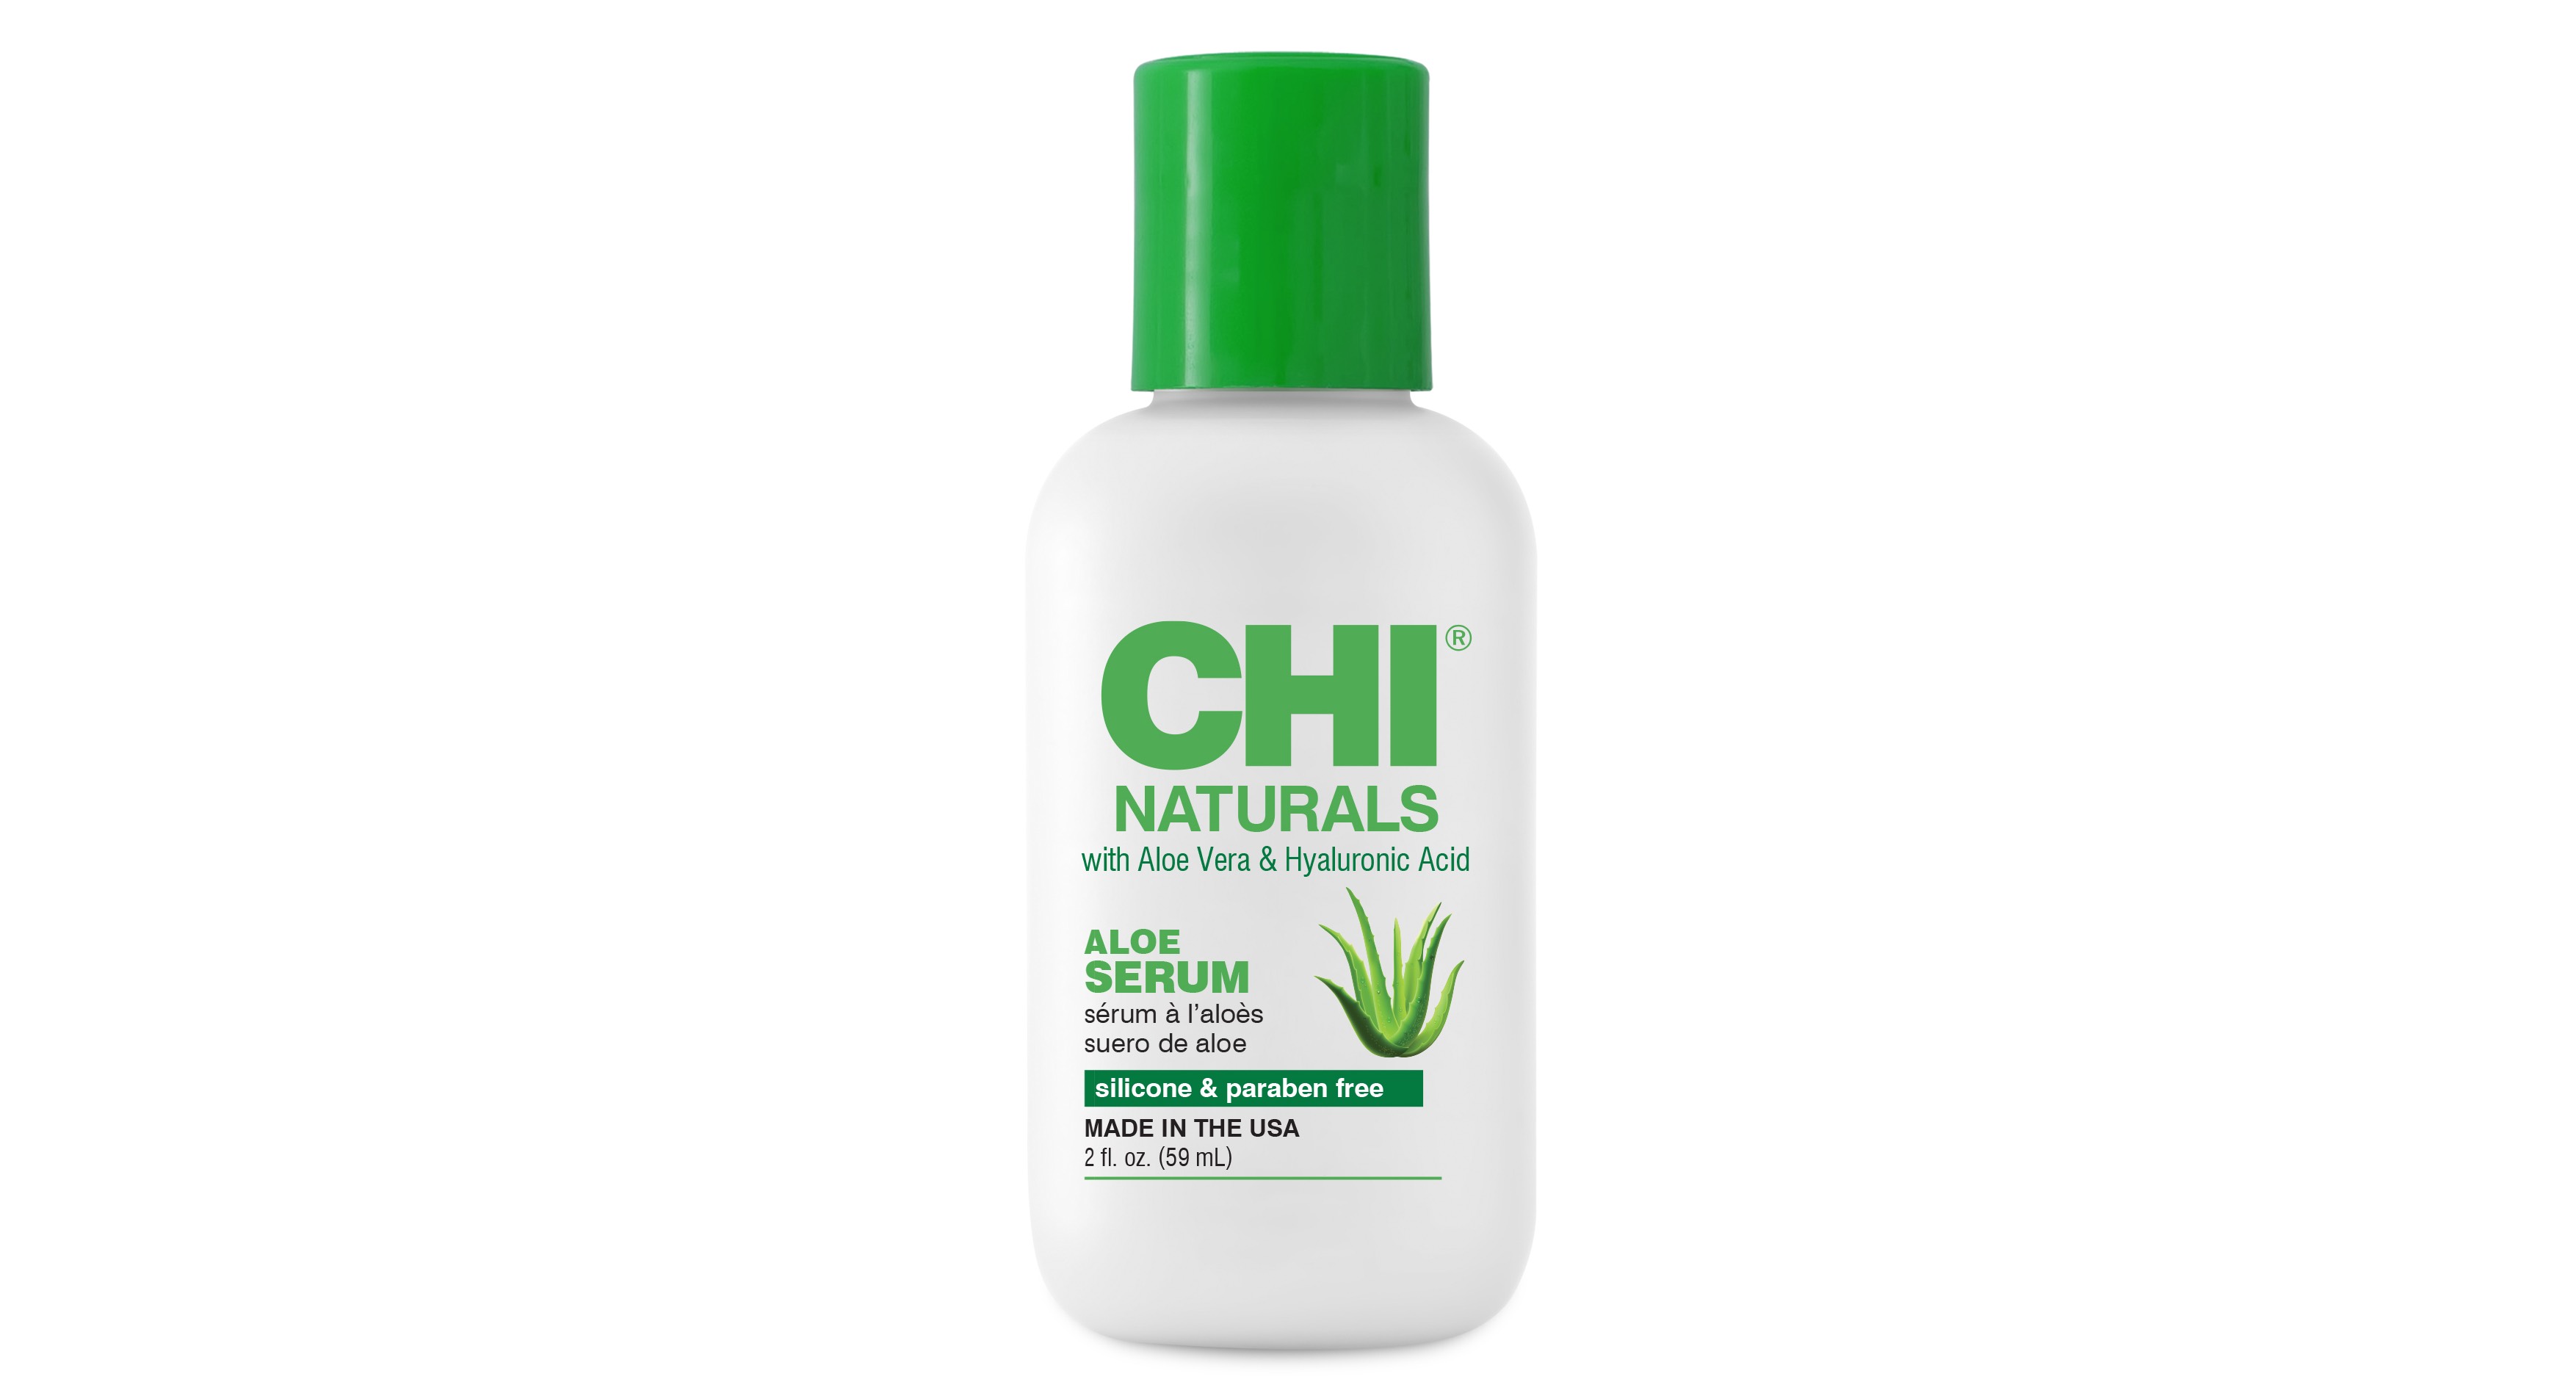 CHI Haircare Launches CHI Naturals With Aloe Vera, Hyaluronic Acid Collection